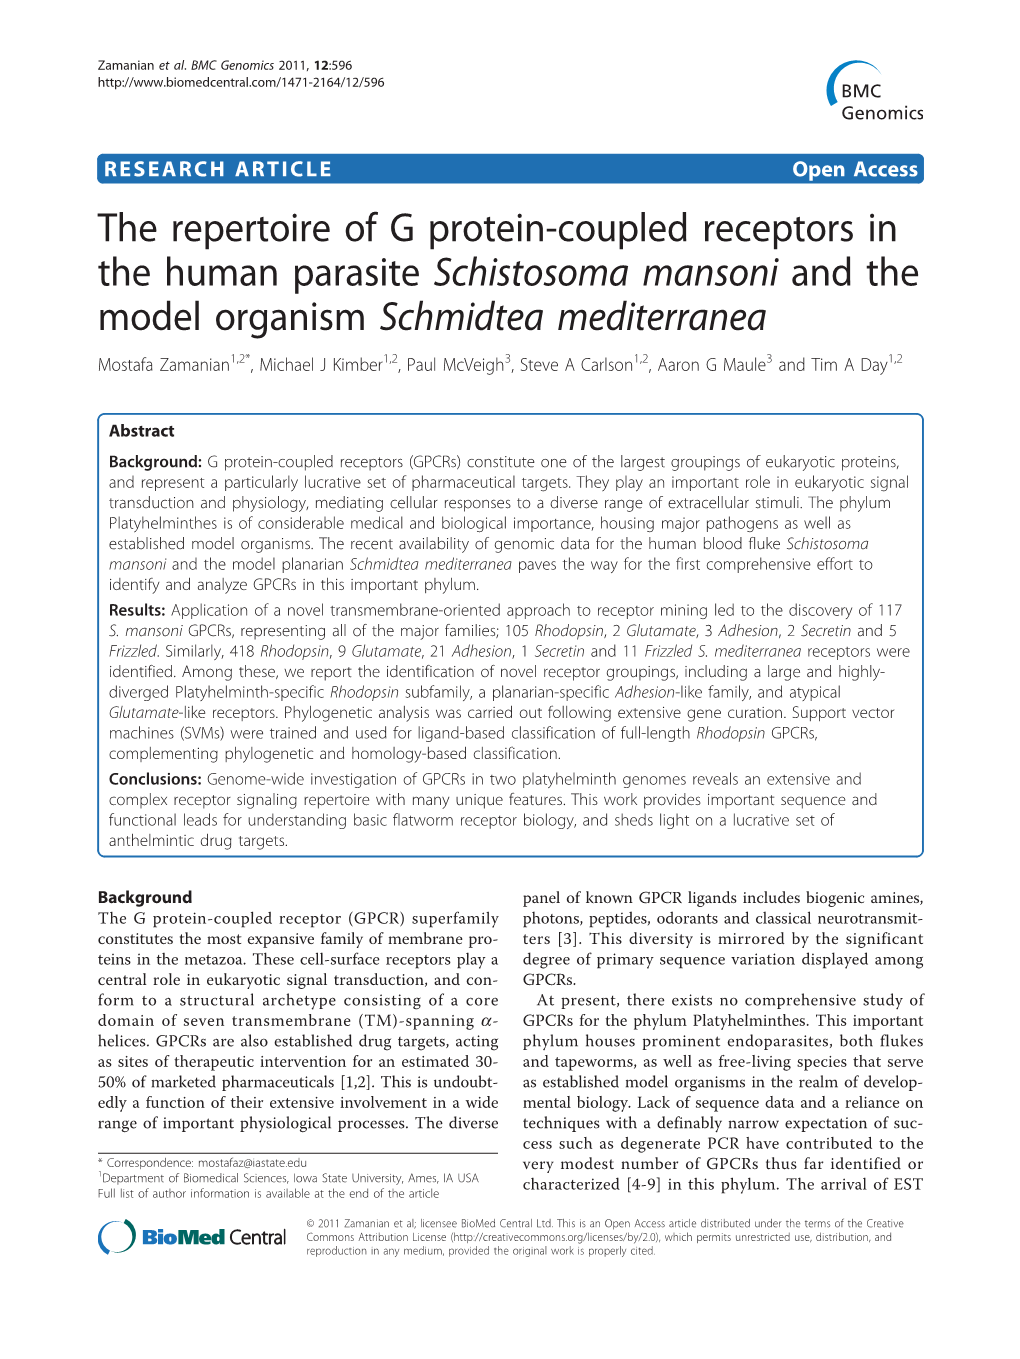 The Repertoire of G Protein-Coupled Receptors in the Human Parasite Schistosoma Mansoni and the Model Organism Schmidtea Mediter